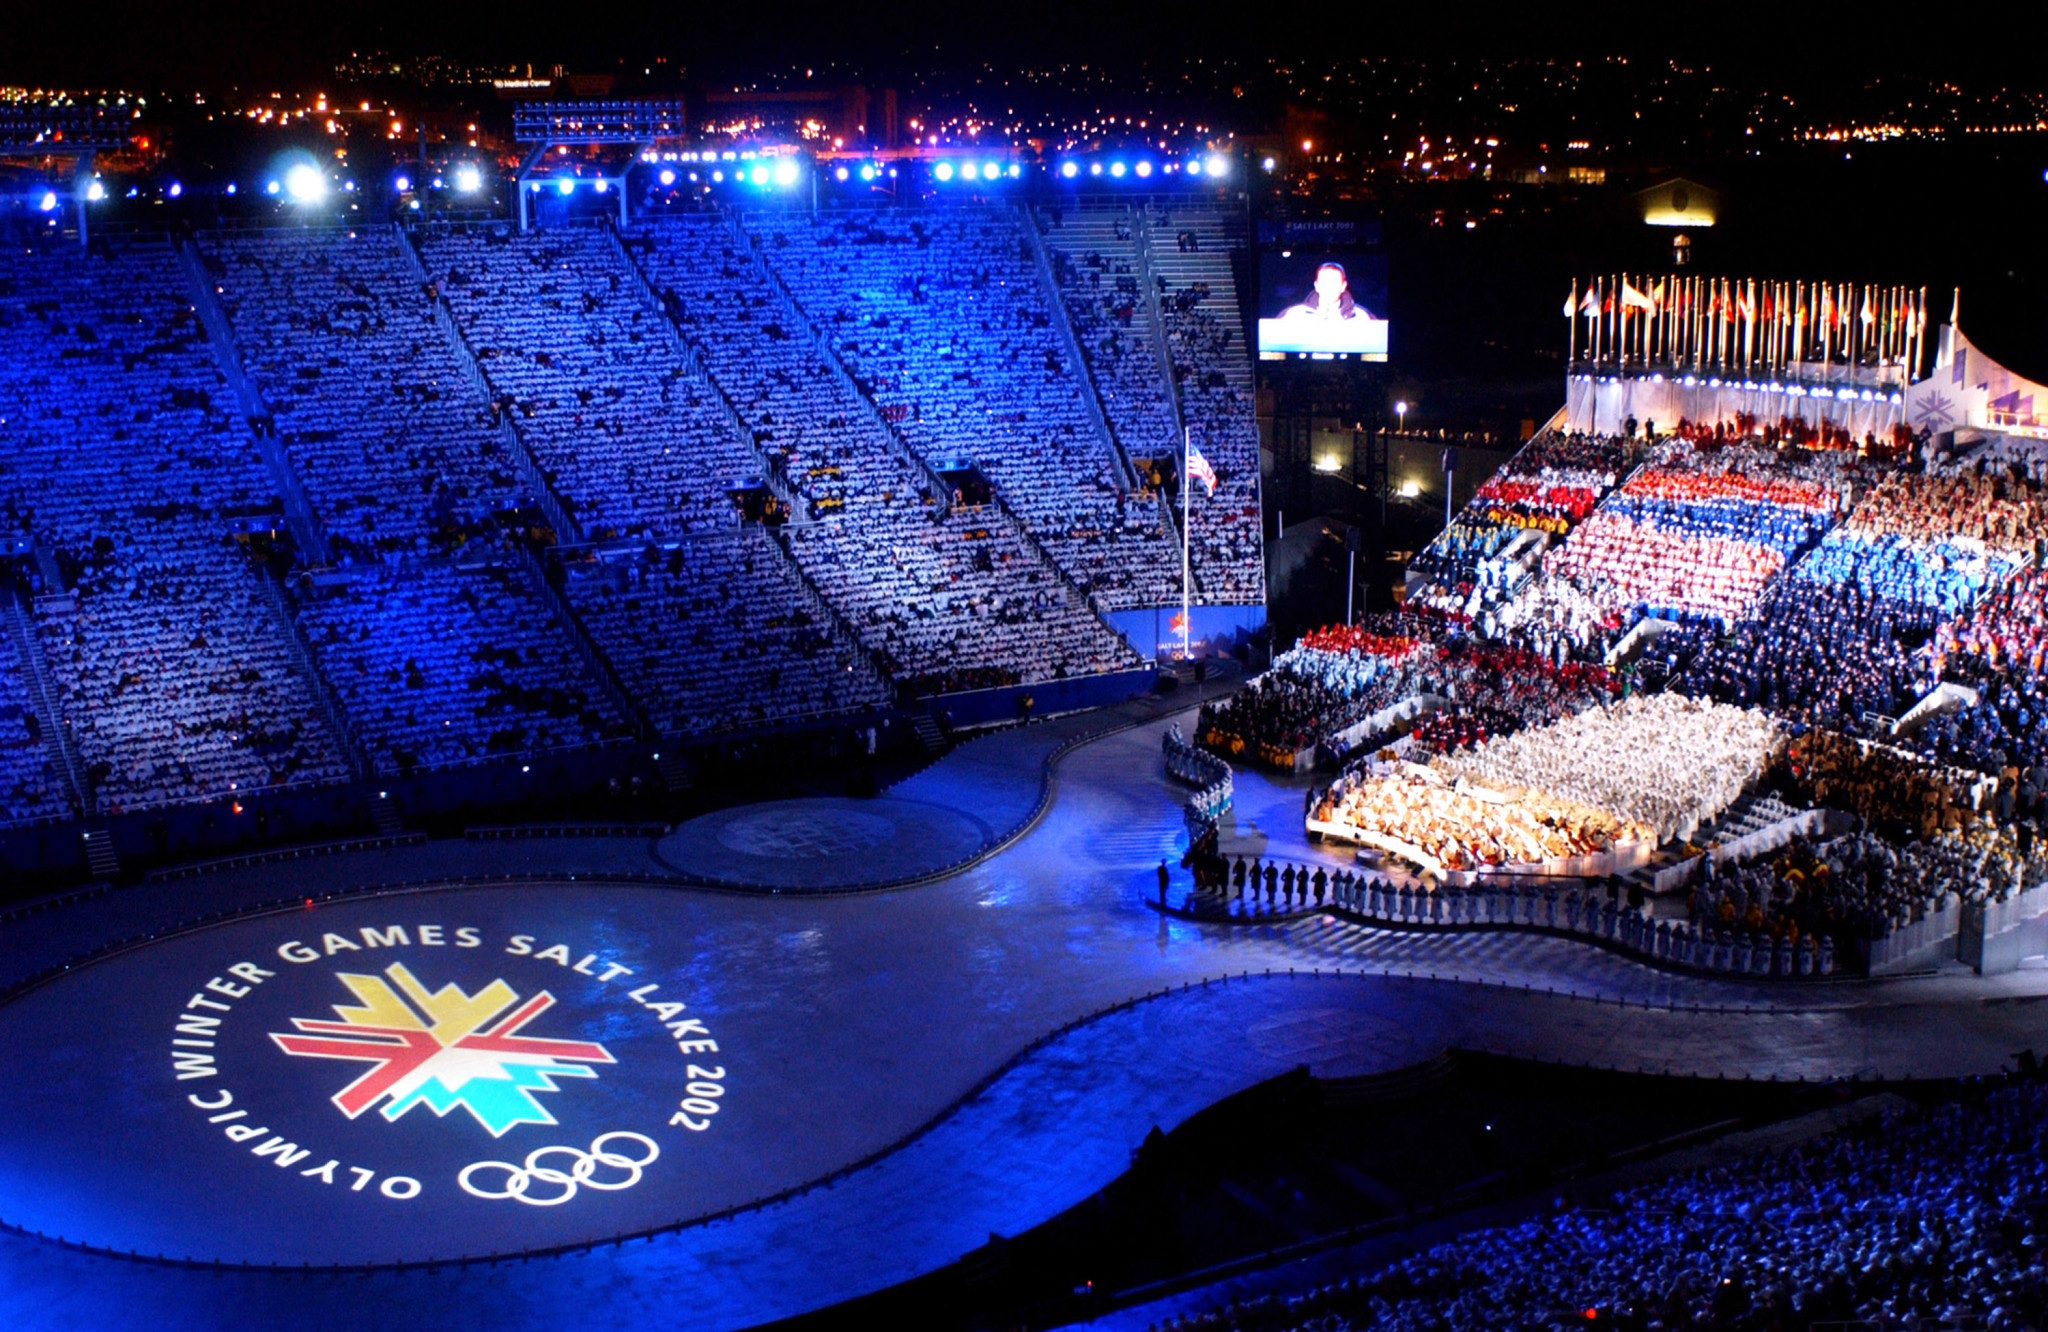 Salt Lake City hosted the Winter Olympics in 2002 ©Getty Images